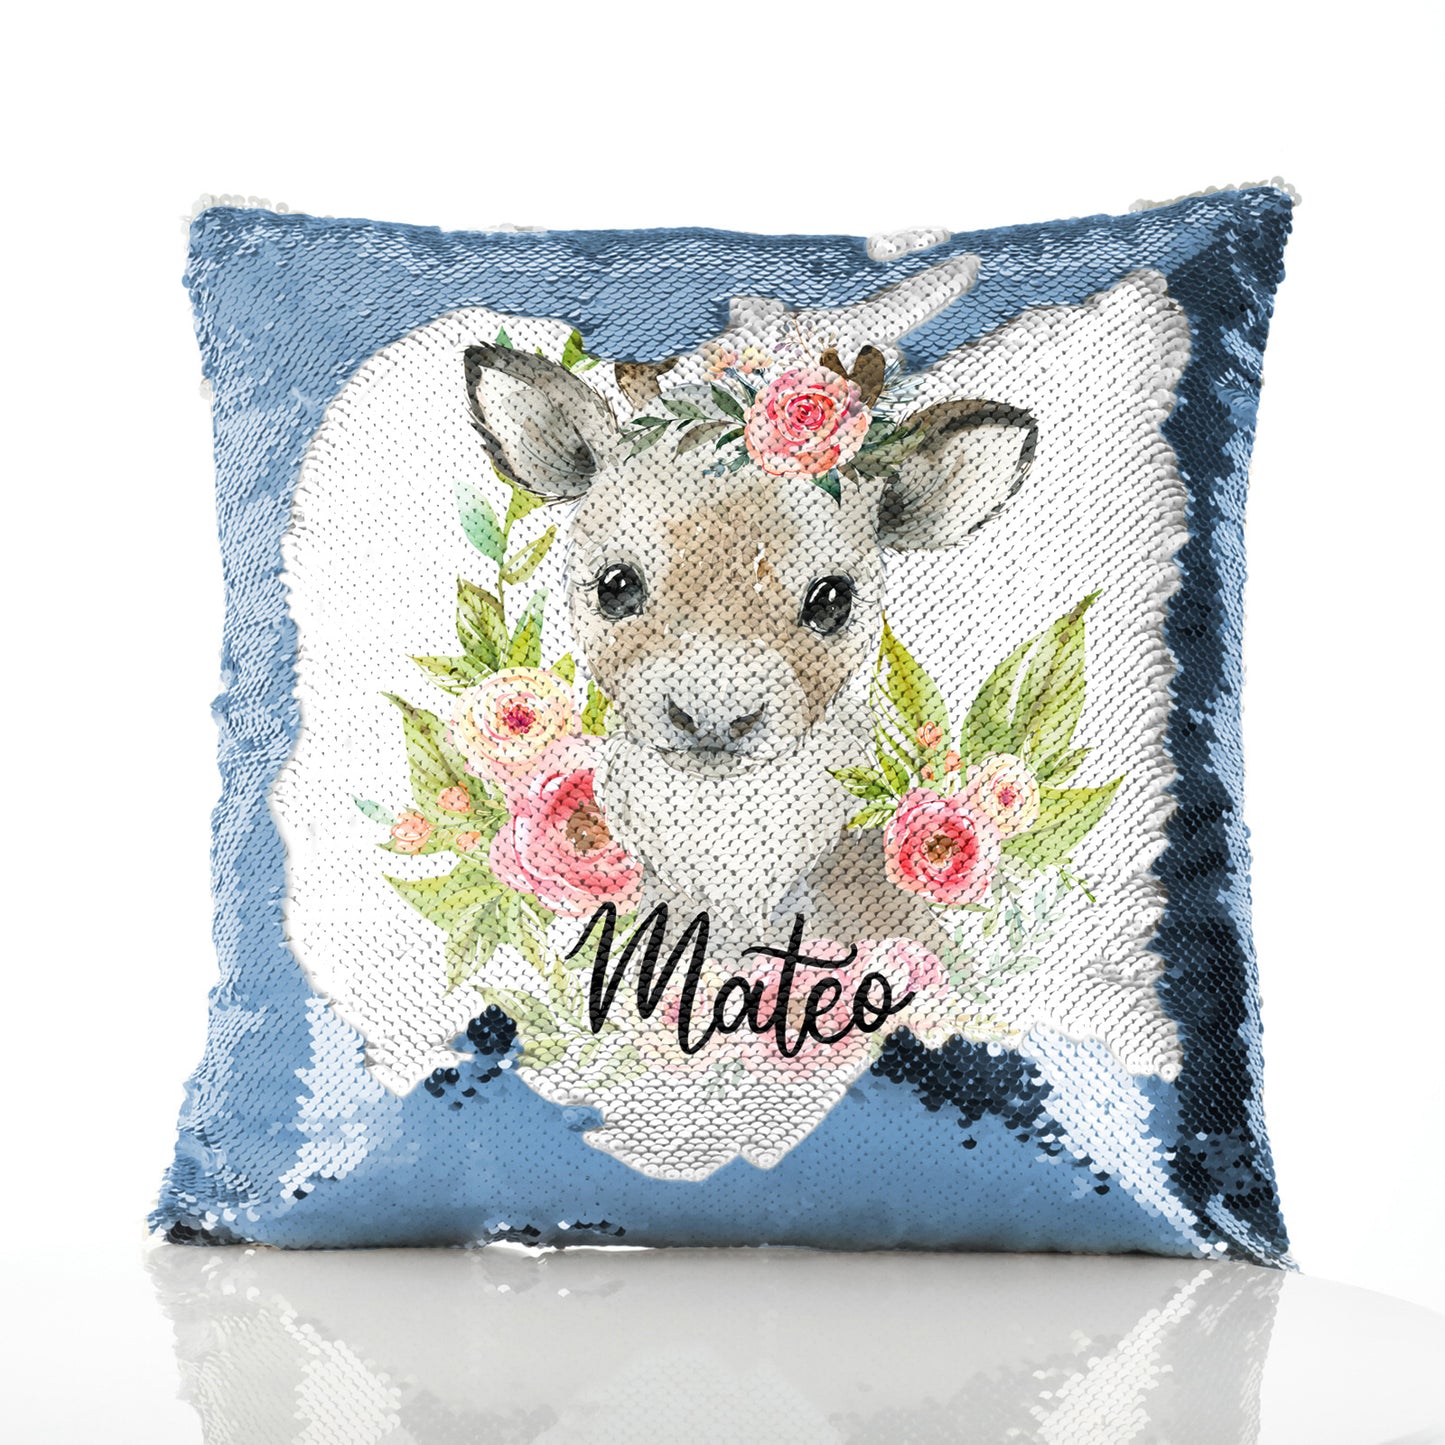 Personalised Sequin Cushion with Reindeer Pink Flowers and Cute Text